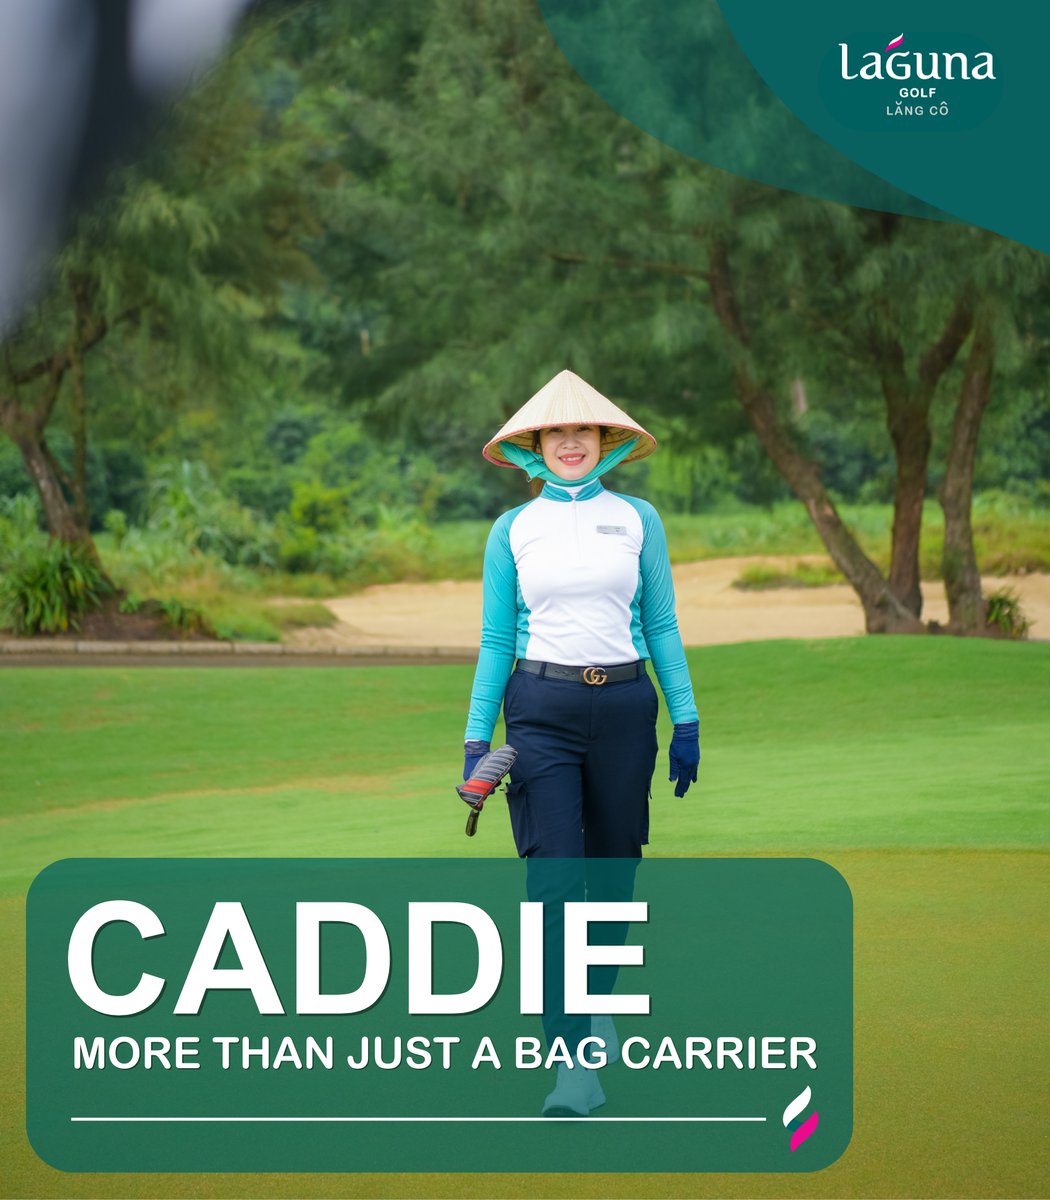 In the world of curving golf balls, it's not just the players with their powerful swings that make an impact, but also the indispensable companions - the caddies. Join Laguna Golf Lăng Cô to discover the caddie’s 11-year journey - Ms. Mỹ Lụa at: lagunalangco.com/caddie-s-story…